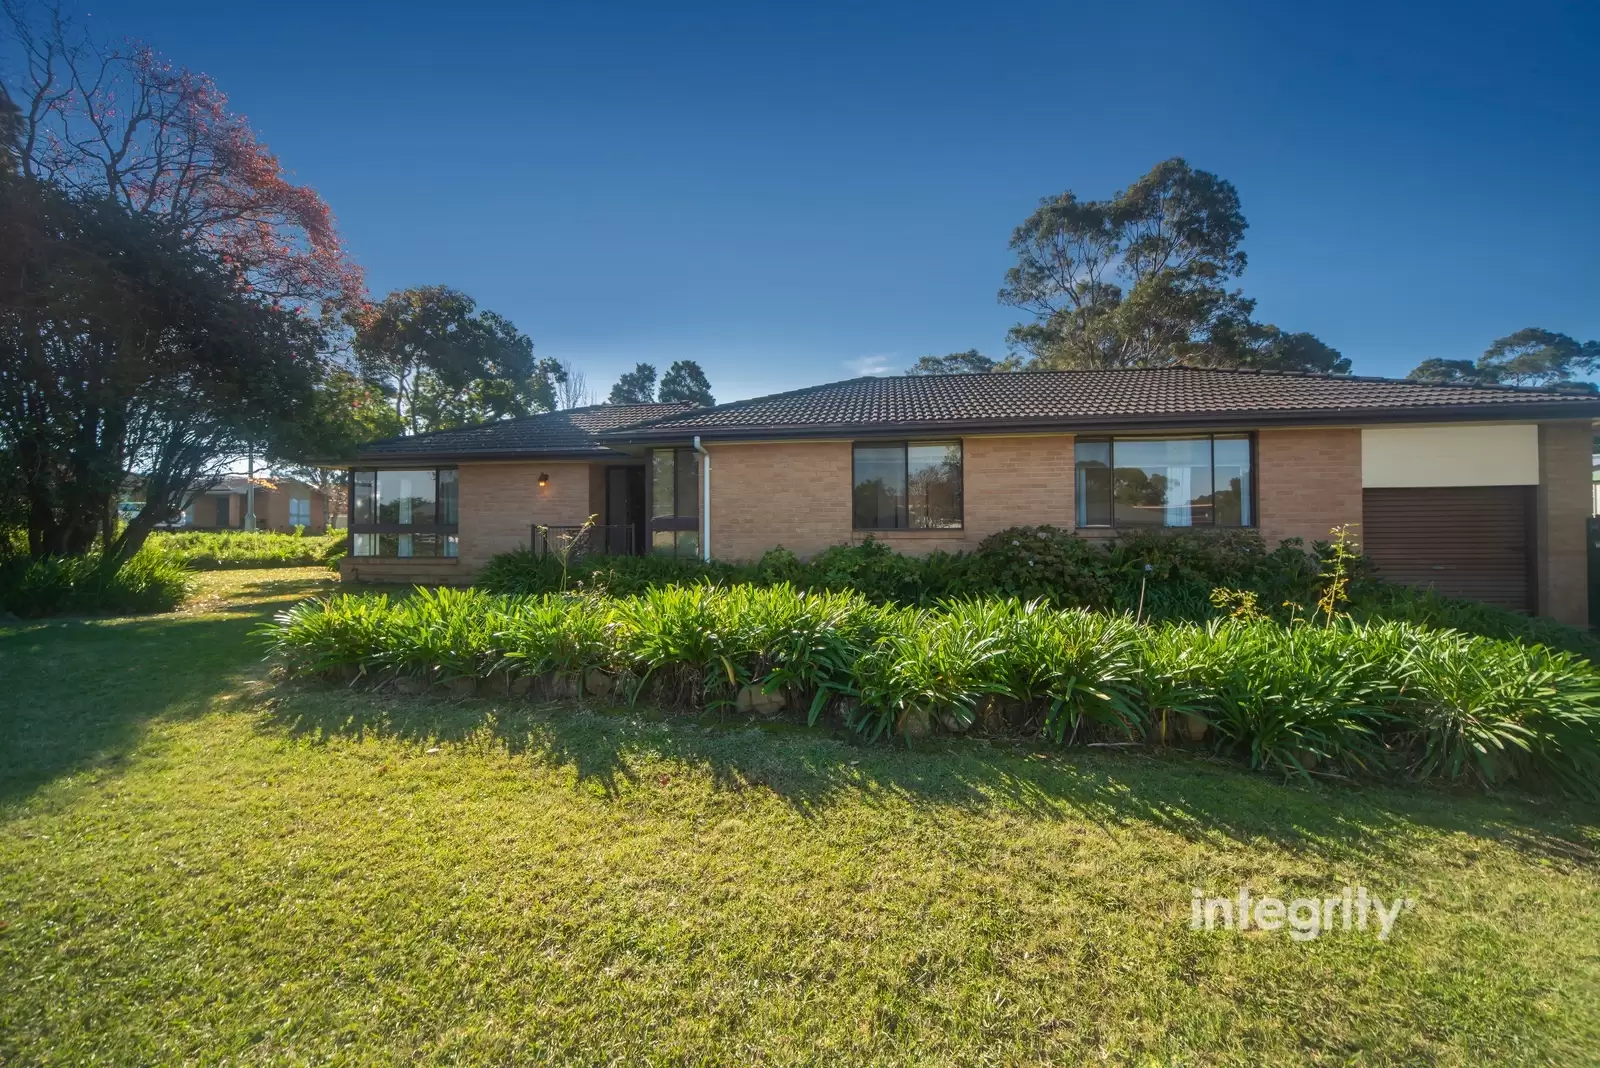 26 McKenzie Street, Nowra For Lease by Integrity Real Estate